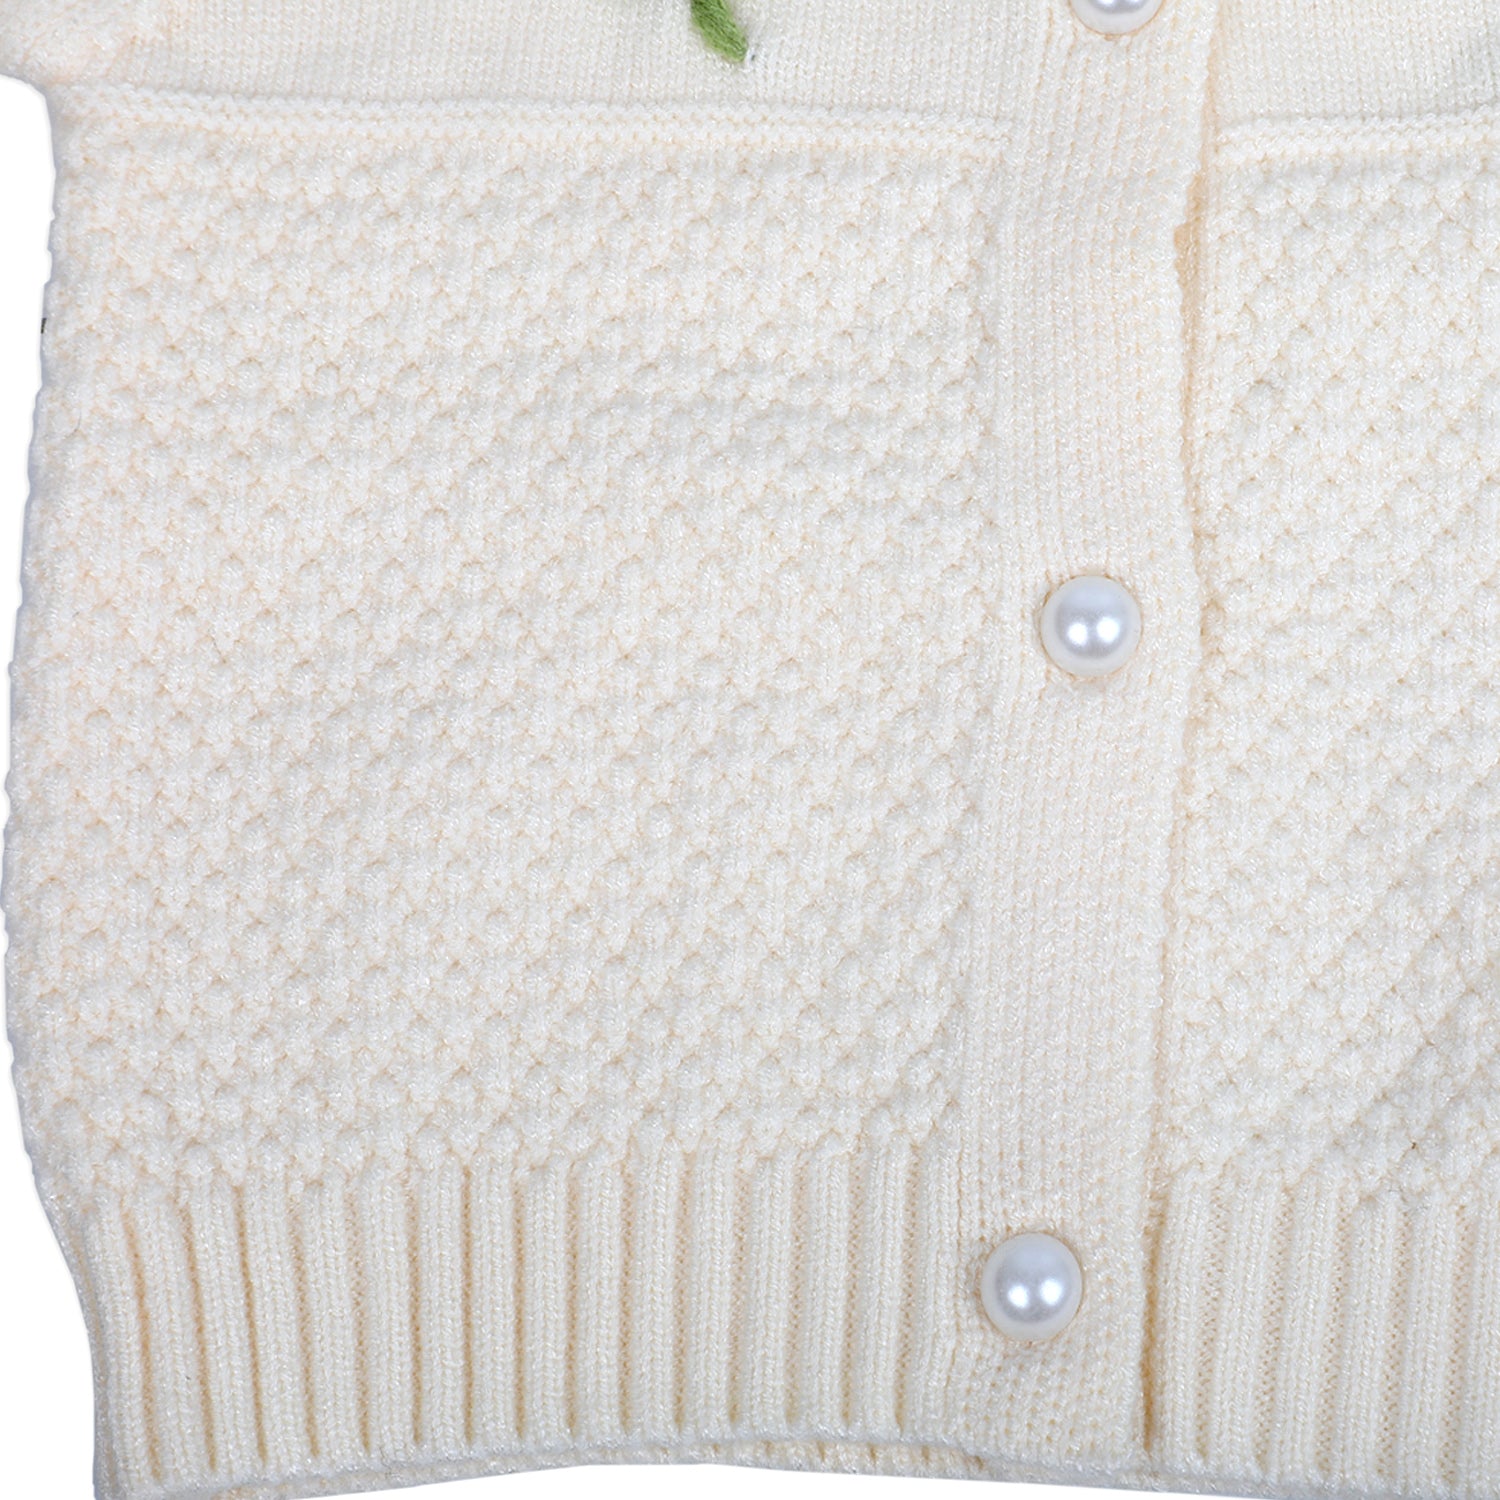 Floral Embroidery Premium Full Sleeves Knitted Sweater - Off White - Baby Moo